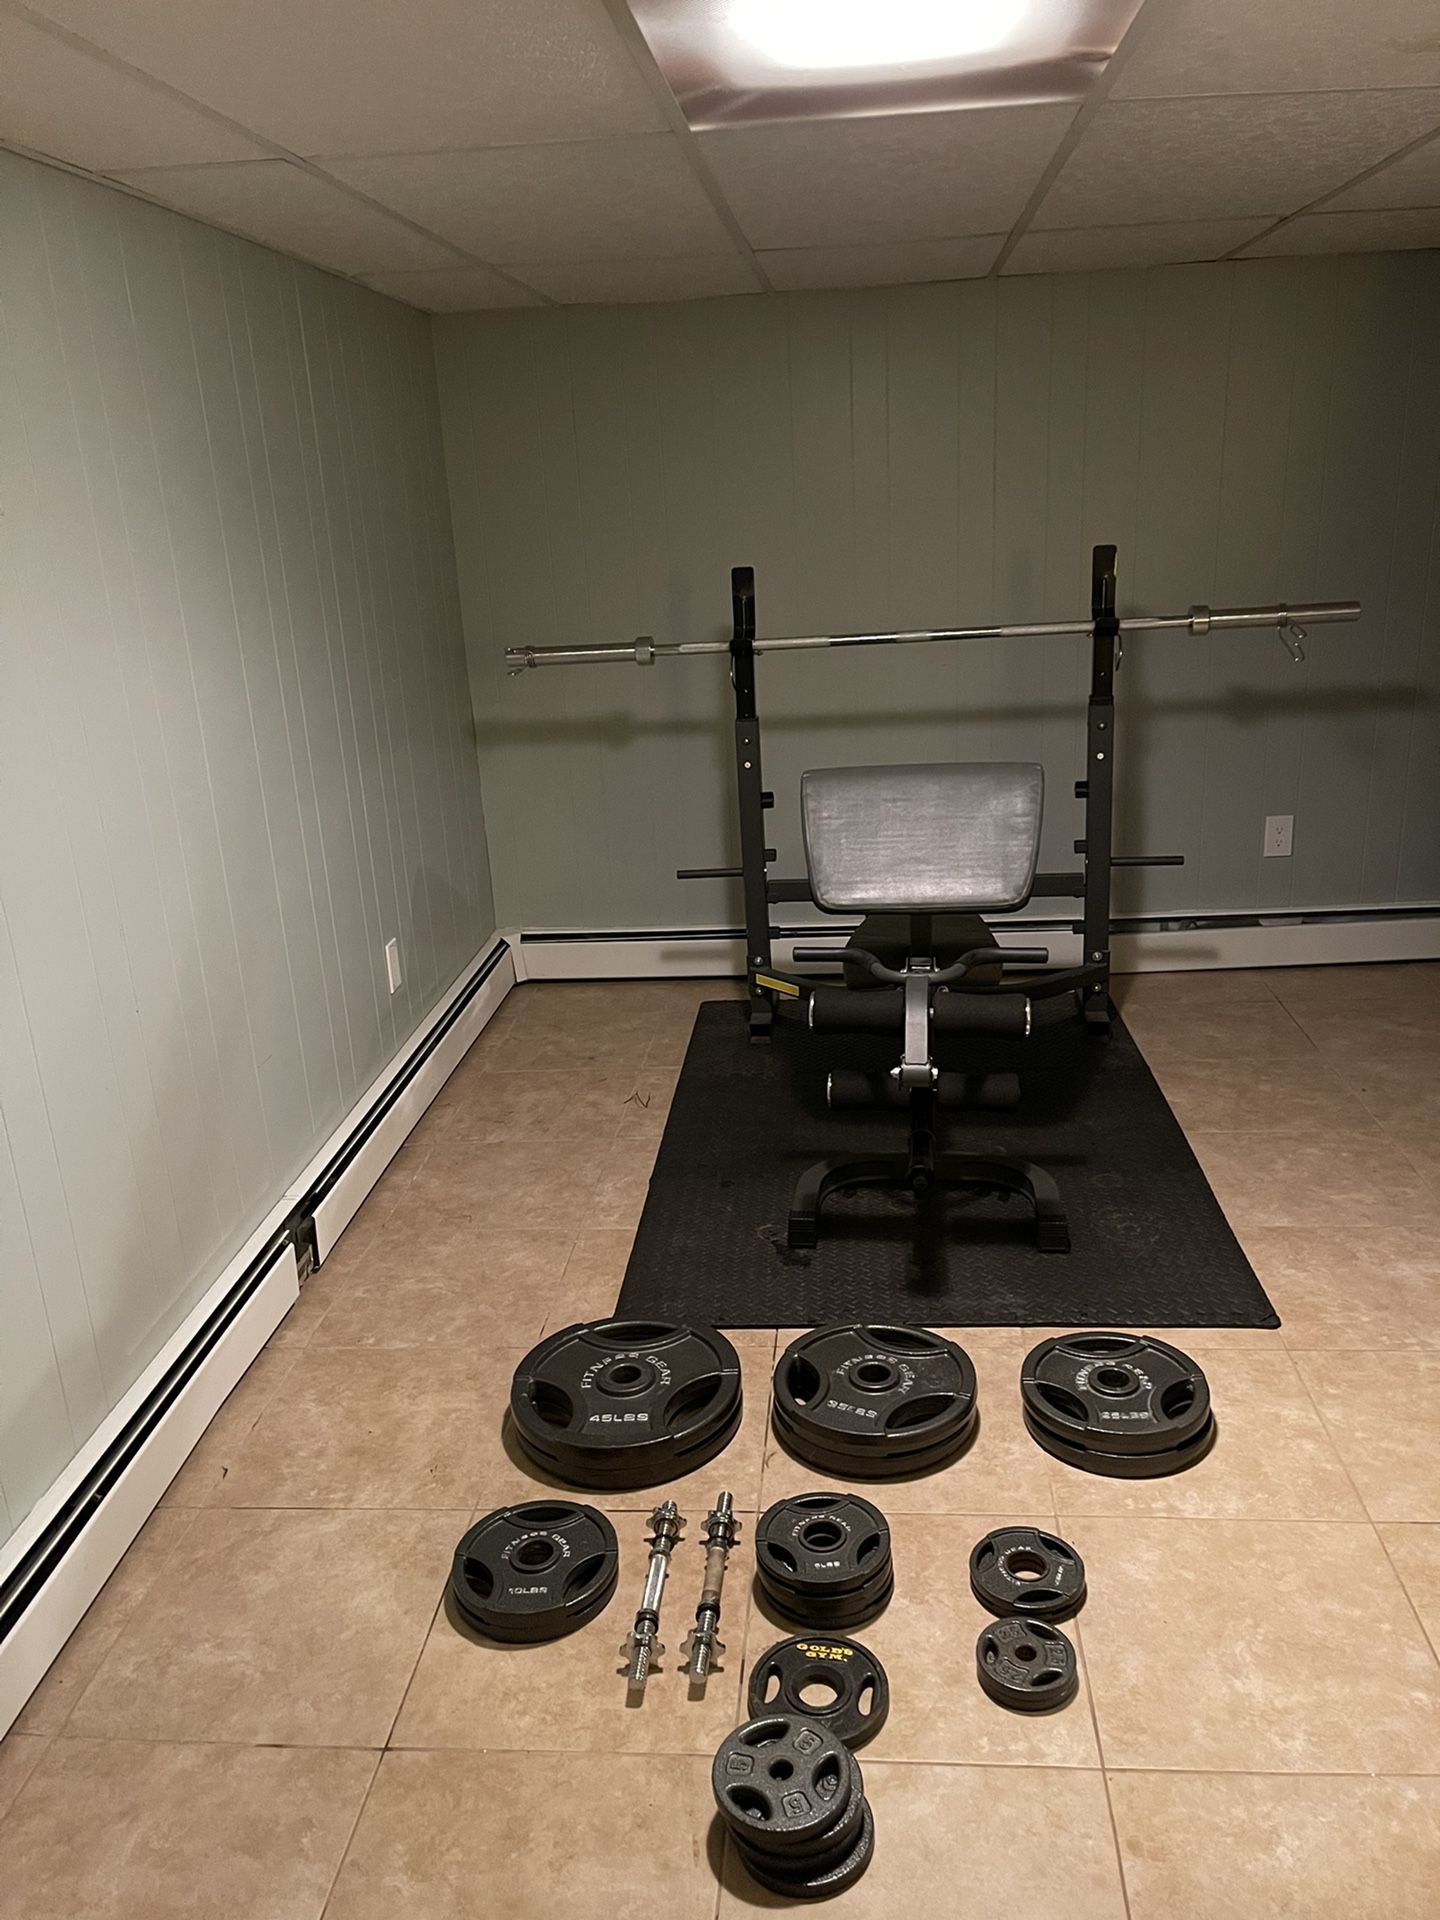 Complete Weight Set - Includes Weight Bar, Weight Bench, Dumbbells, Weight Plates